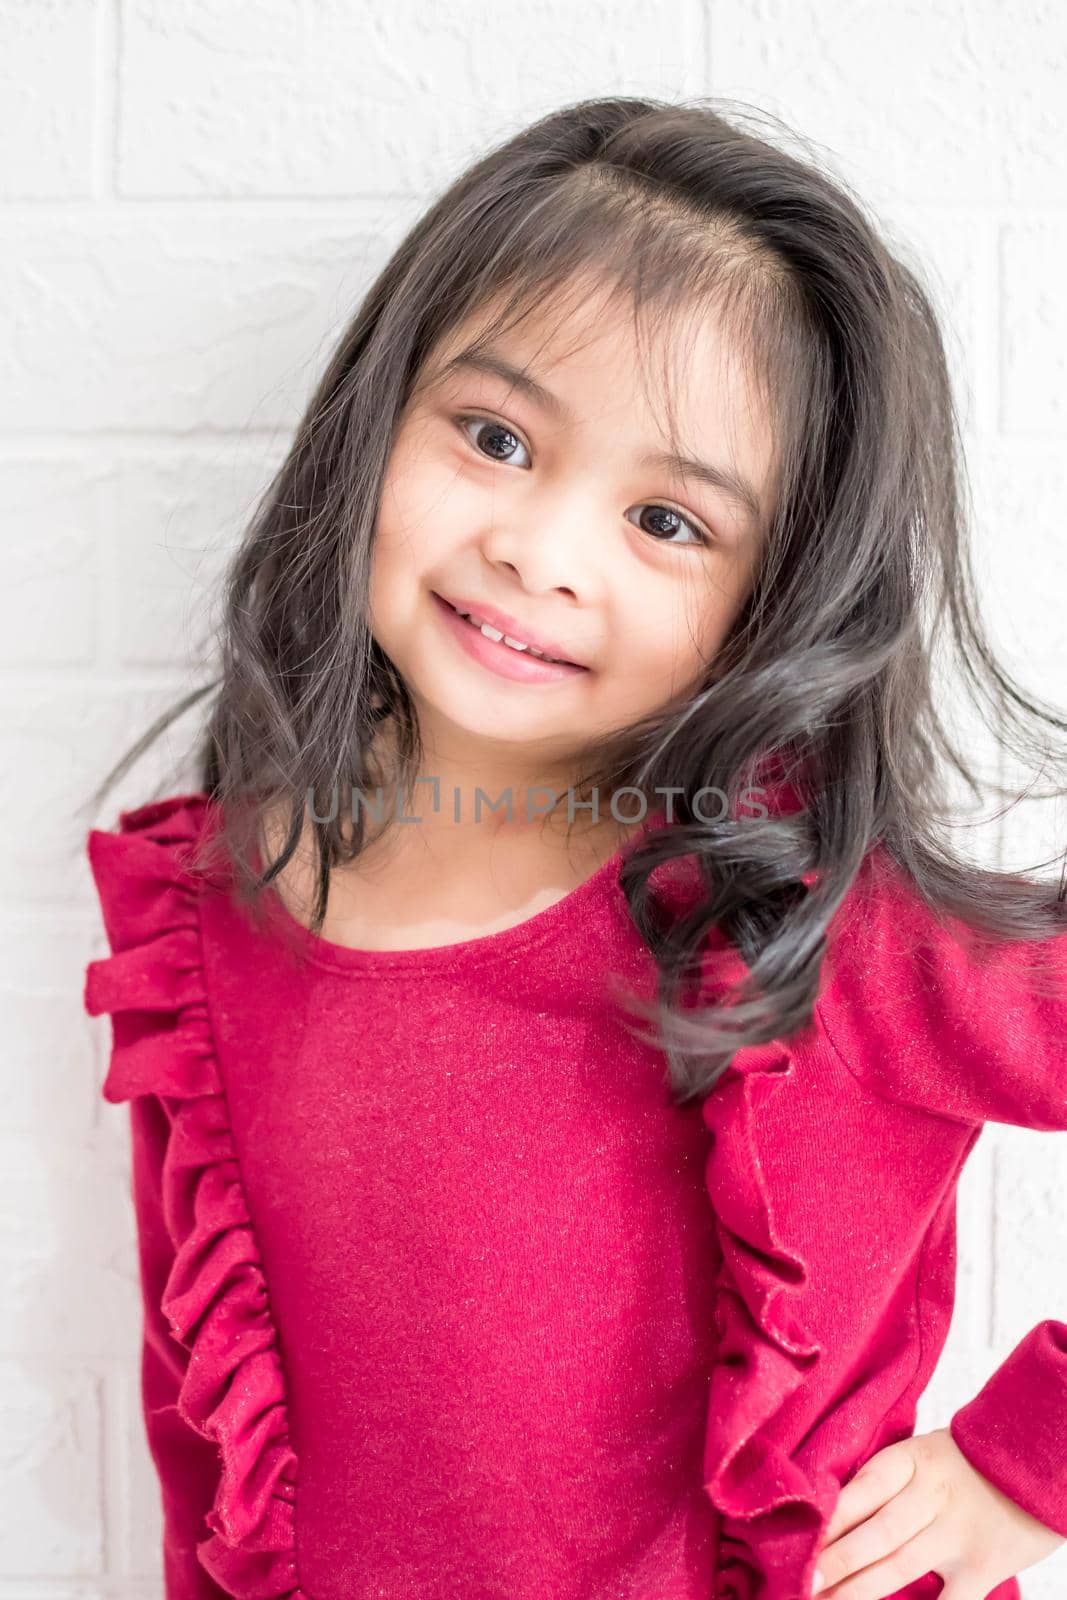 A Fashion model and beauty look. Stylish girl with pretty face on grey background. Hairdresser, skincare, casual style. Beauty and kid fashion with healthy hair. Little girl with long hair.